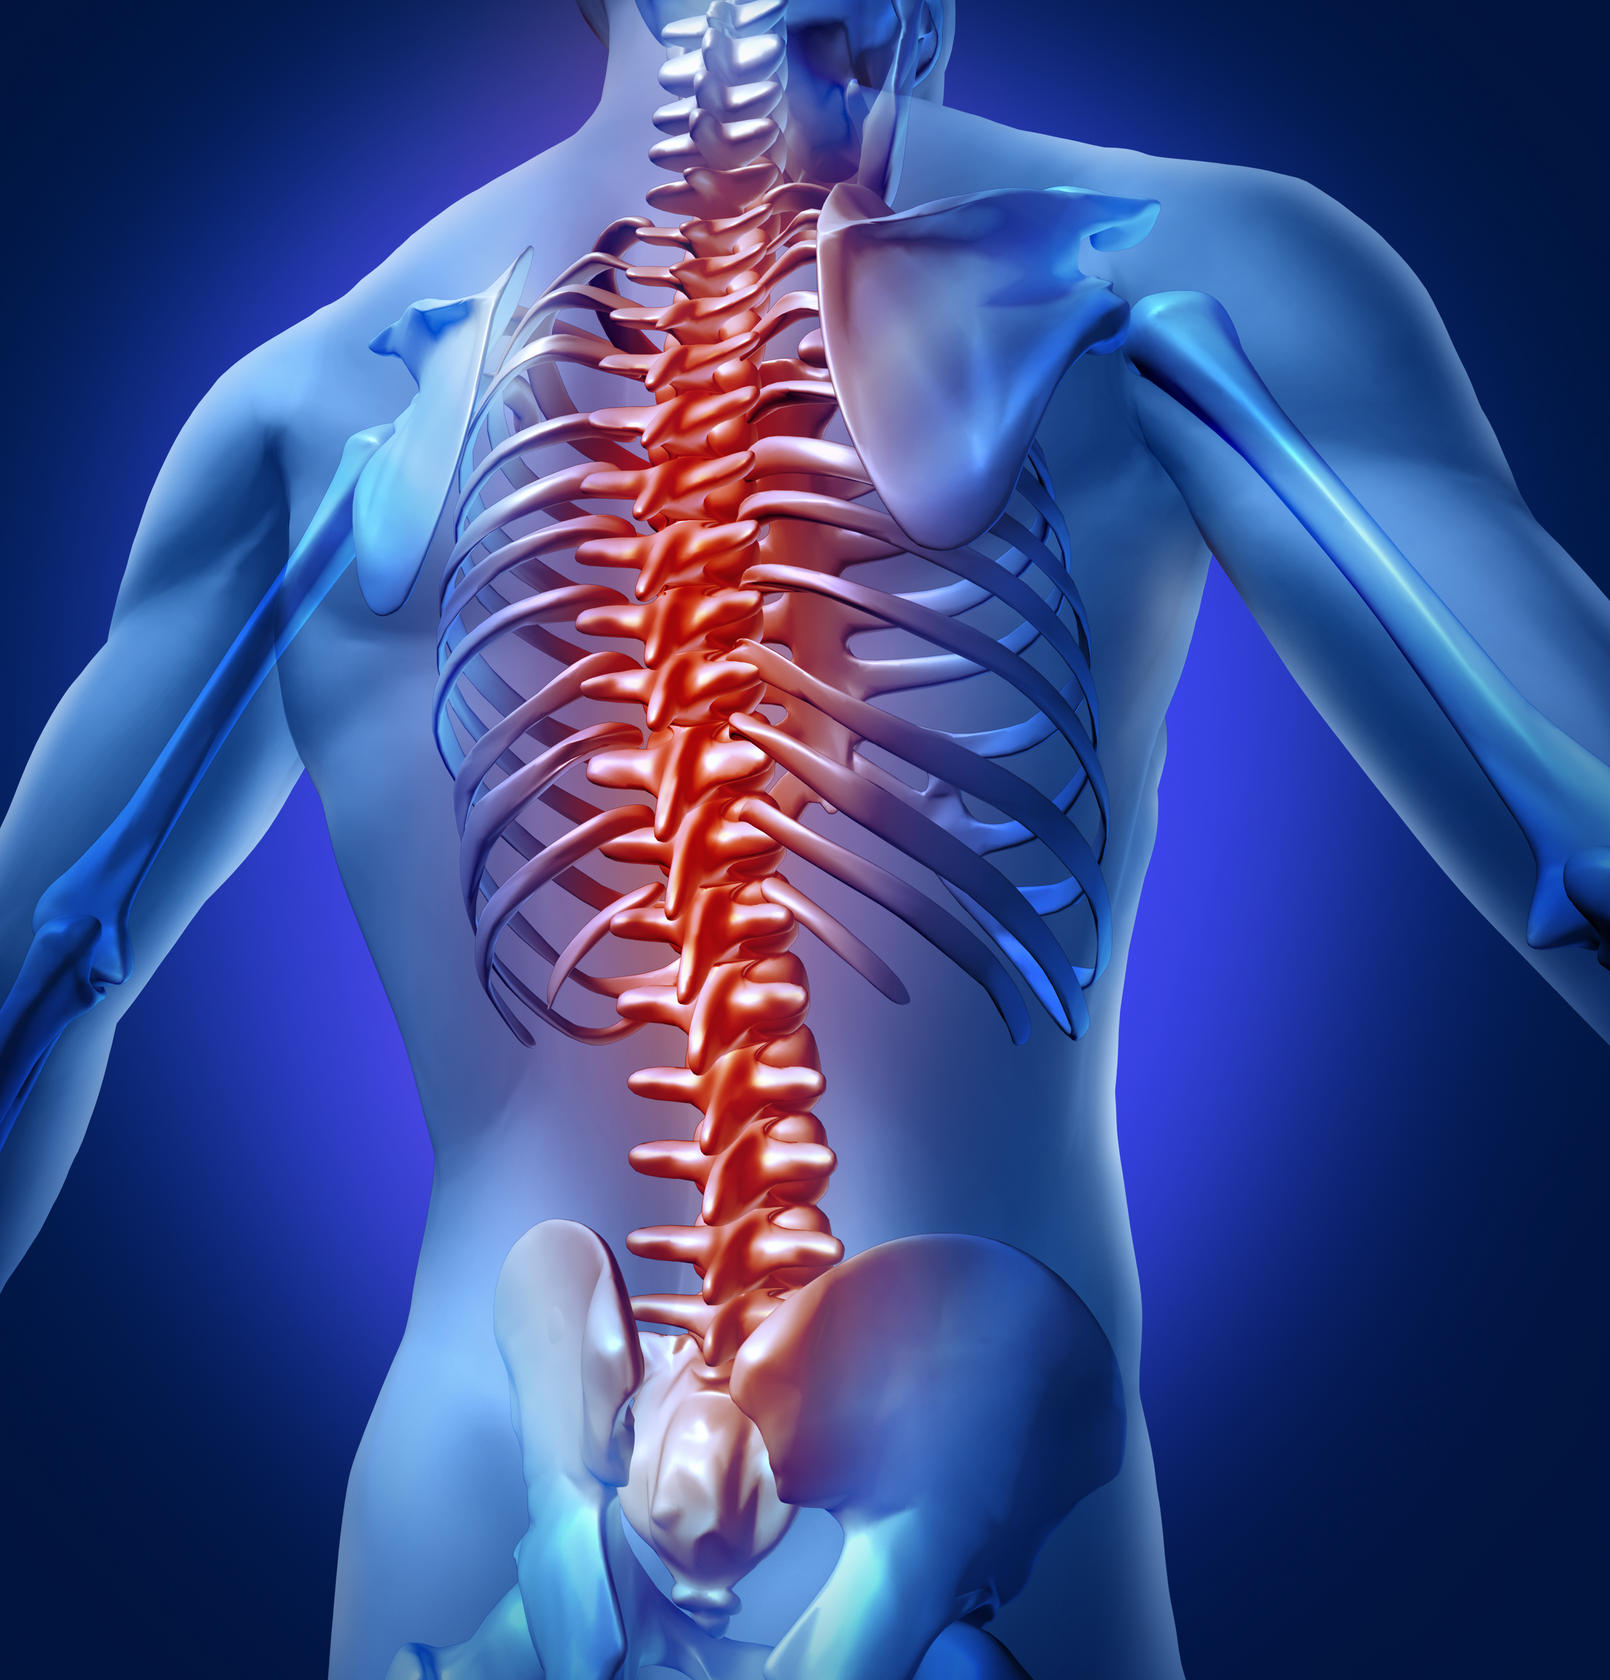 Illustration of a spinal cord injury. 